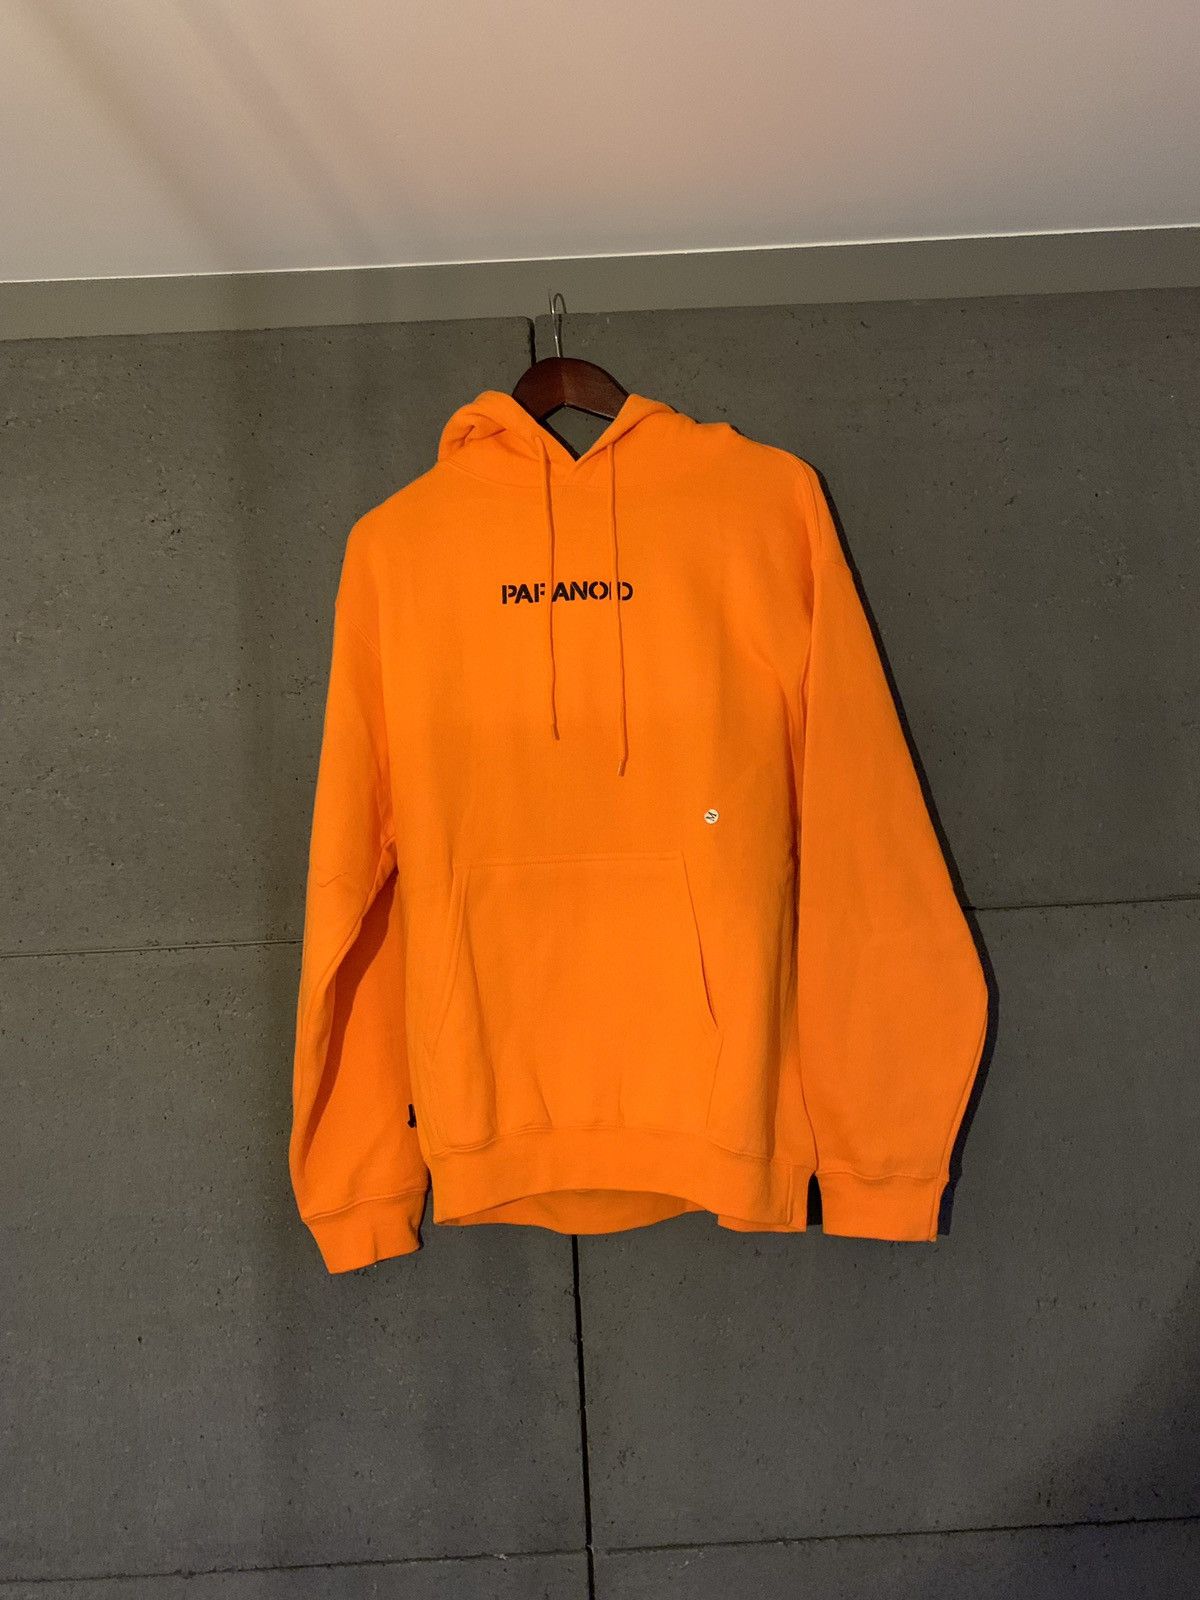 Undefeated ASSC X Undefeated Orange Paranoid Hoodie Size US S / EU 44-46 / 1 - 2 Preview